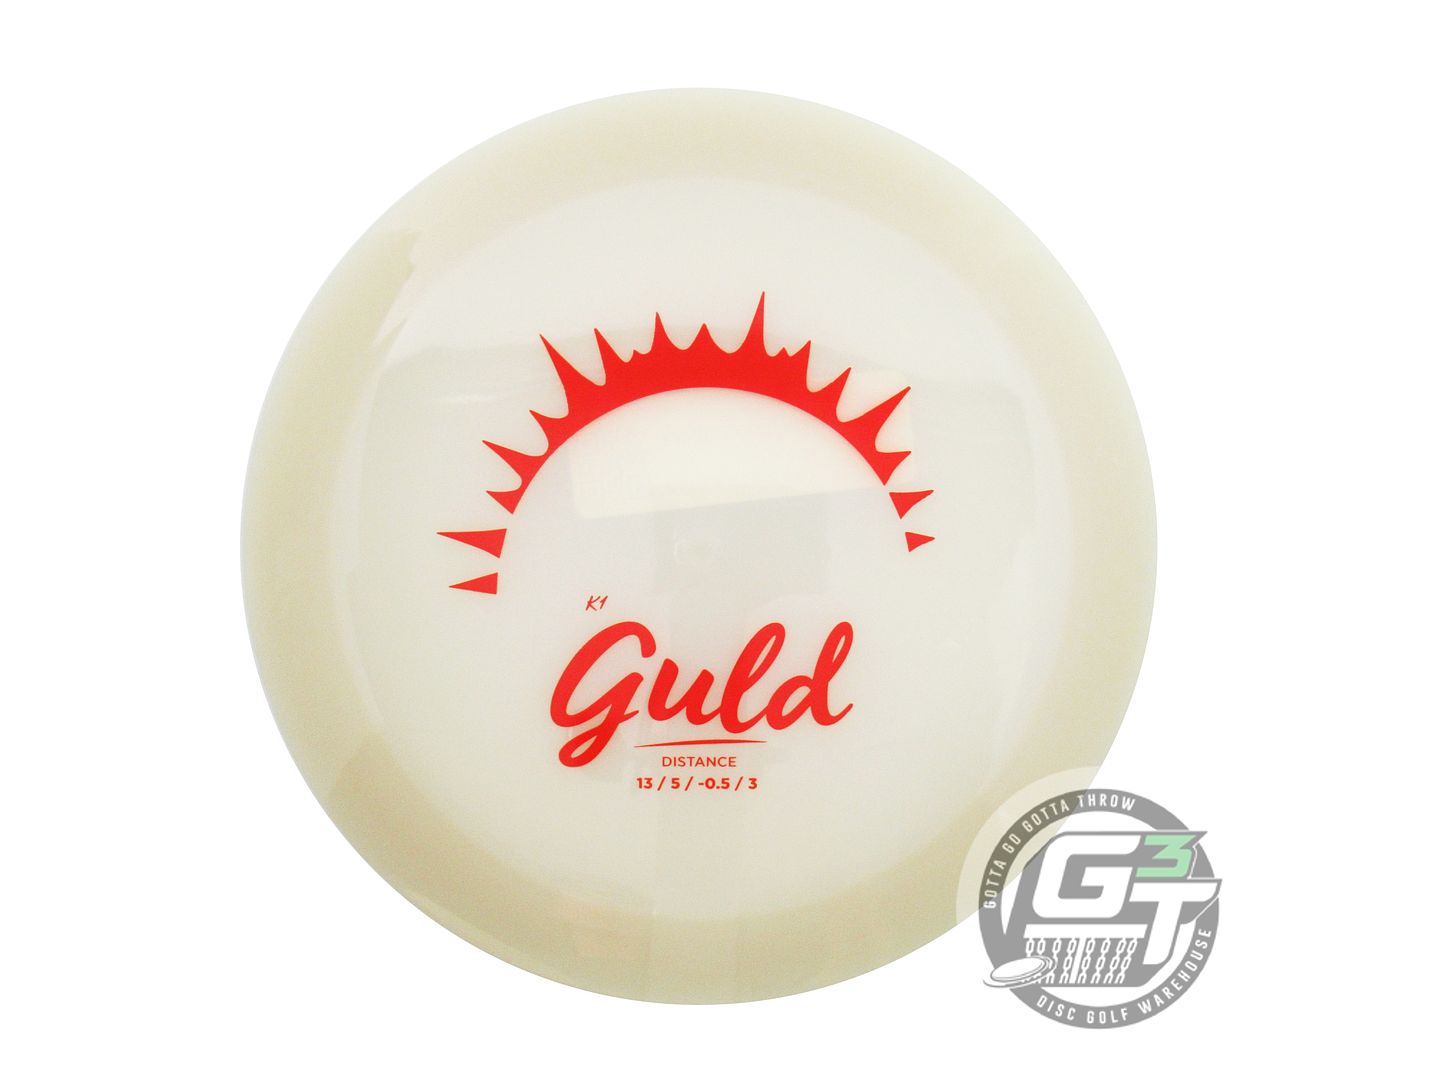 Kastaplast Glow K1 Guld Distance Driver Golf Disc (Individually Listed)